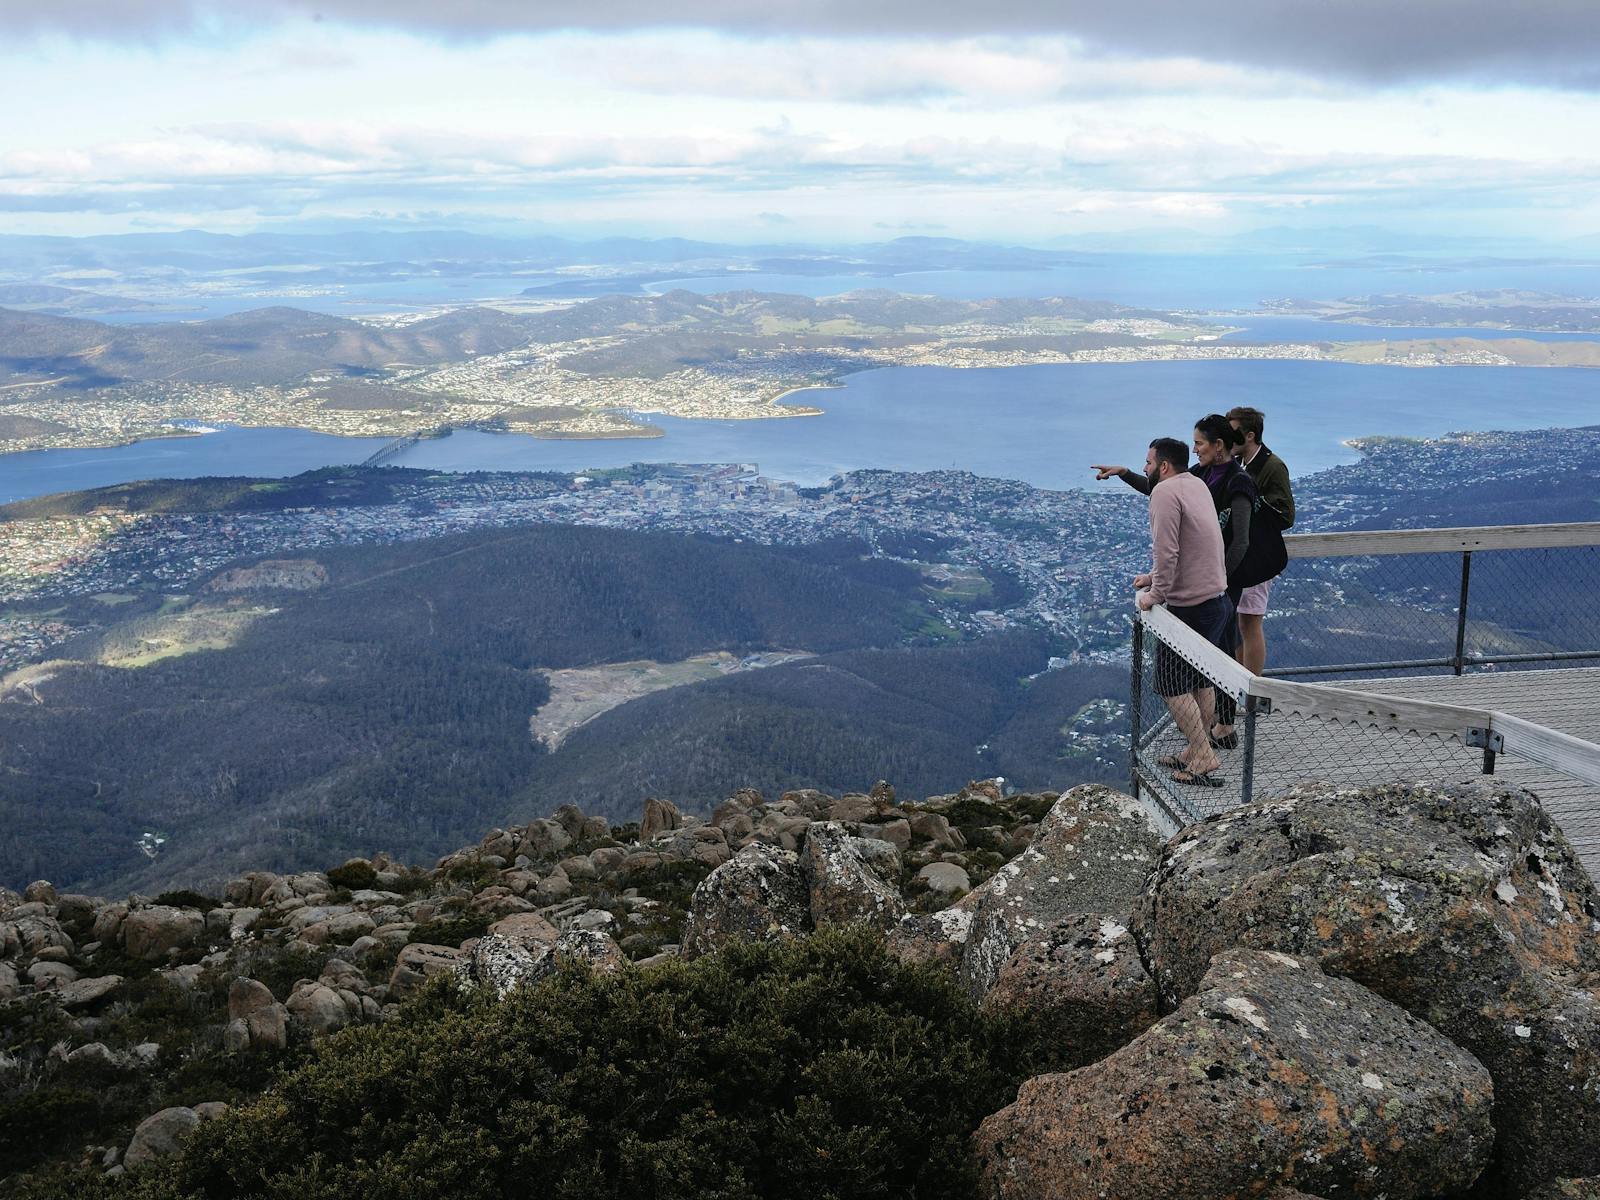 This tour will take you to the top of Mt Wellington to see views of Hobart and beyond.